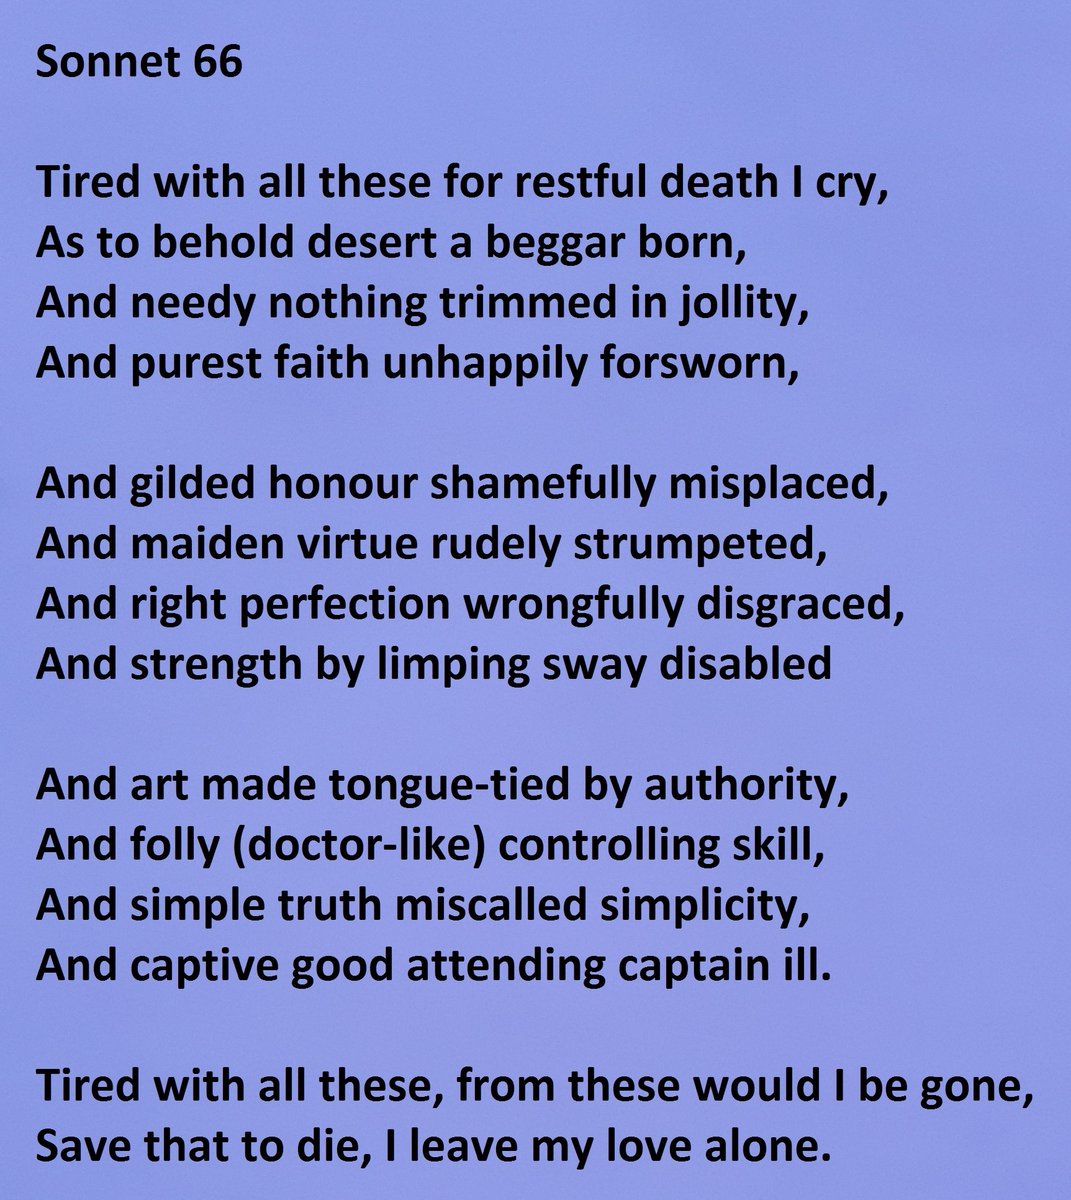 Sonnet 66 by William Shakespeare "Tired with all these for restful death I cry"